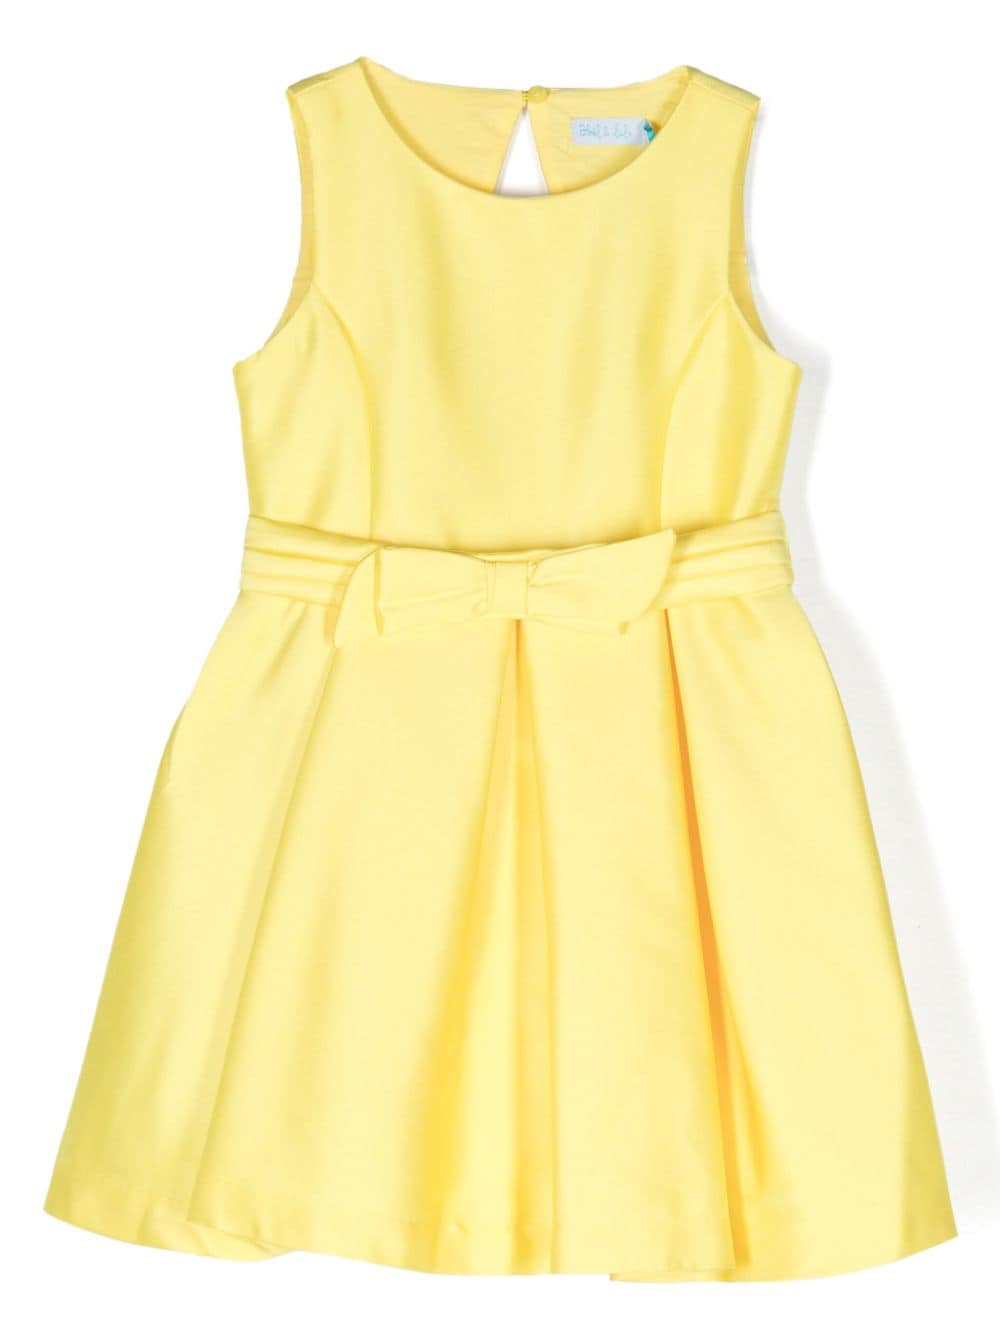 Yellow dress for girls with bow